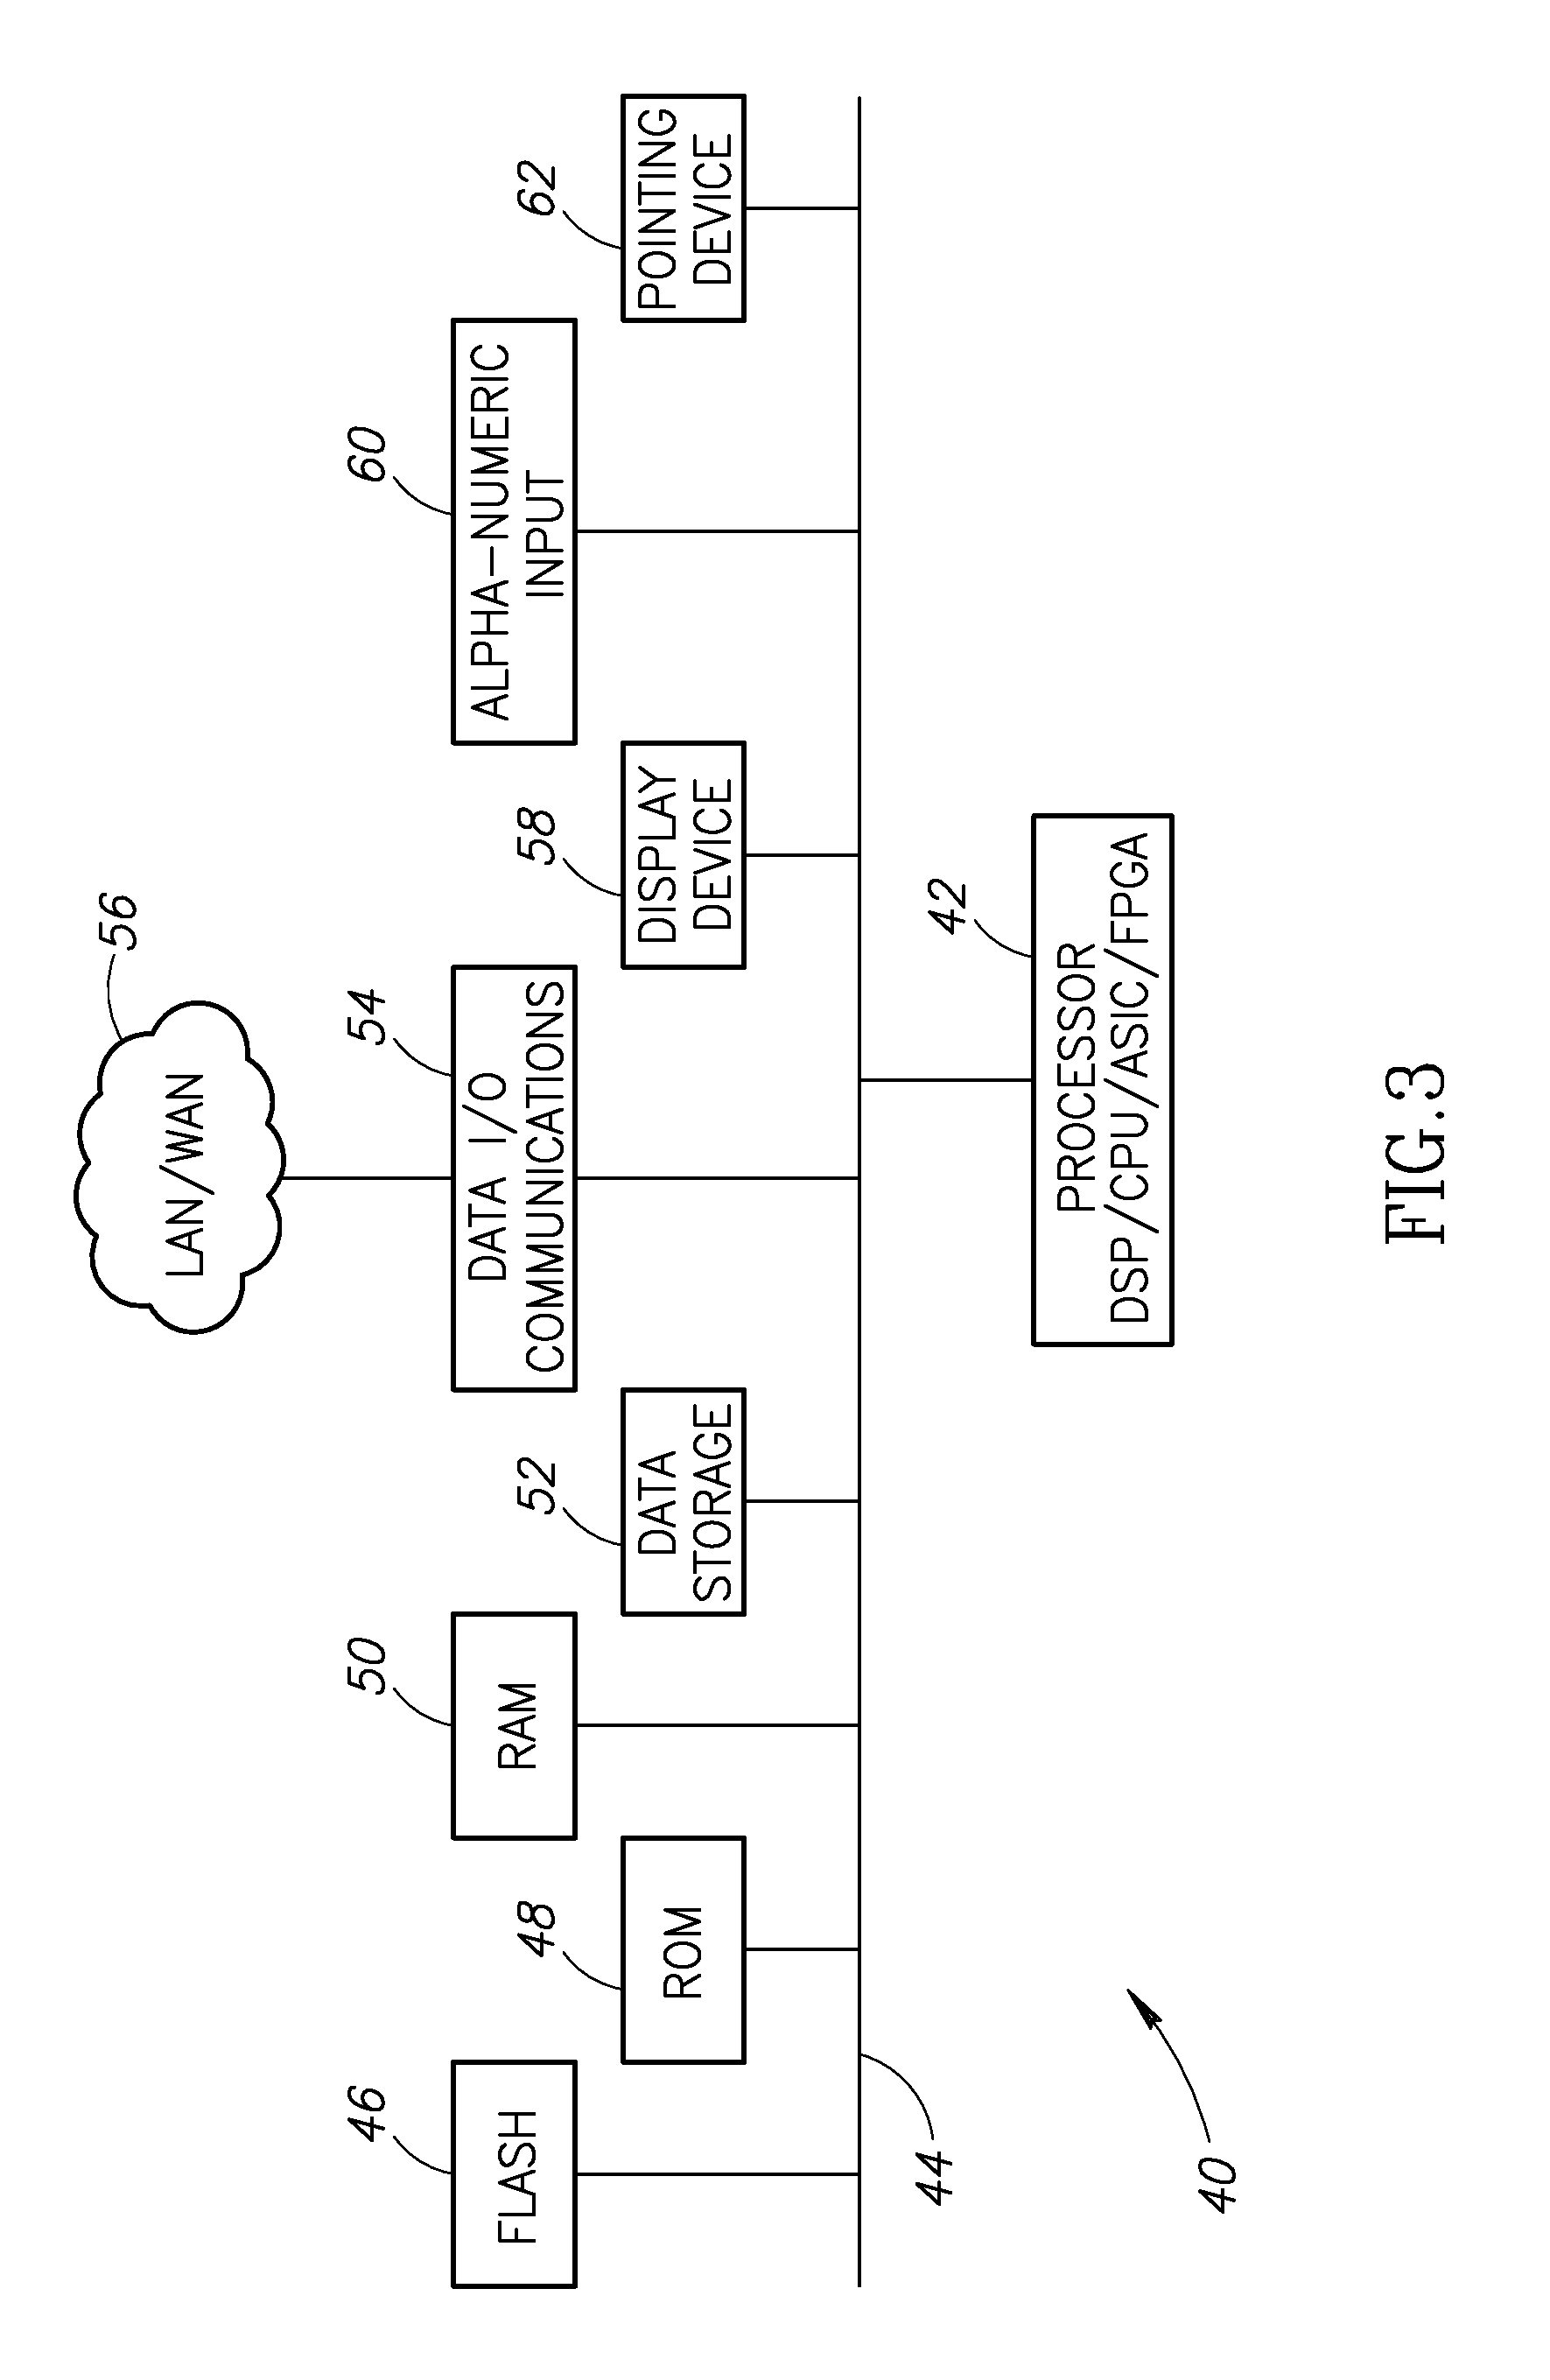 Apparatus for and Method of Generating Complex Event Processing System Rules